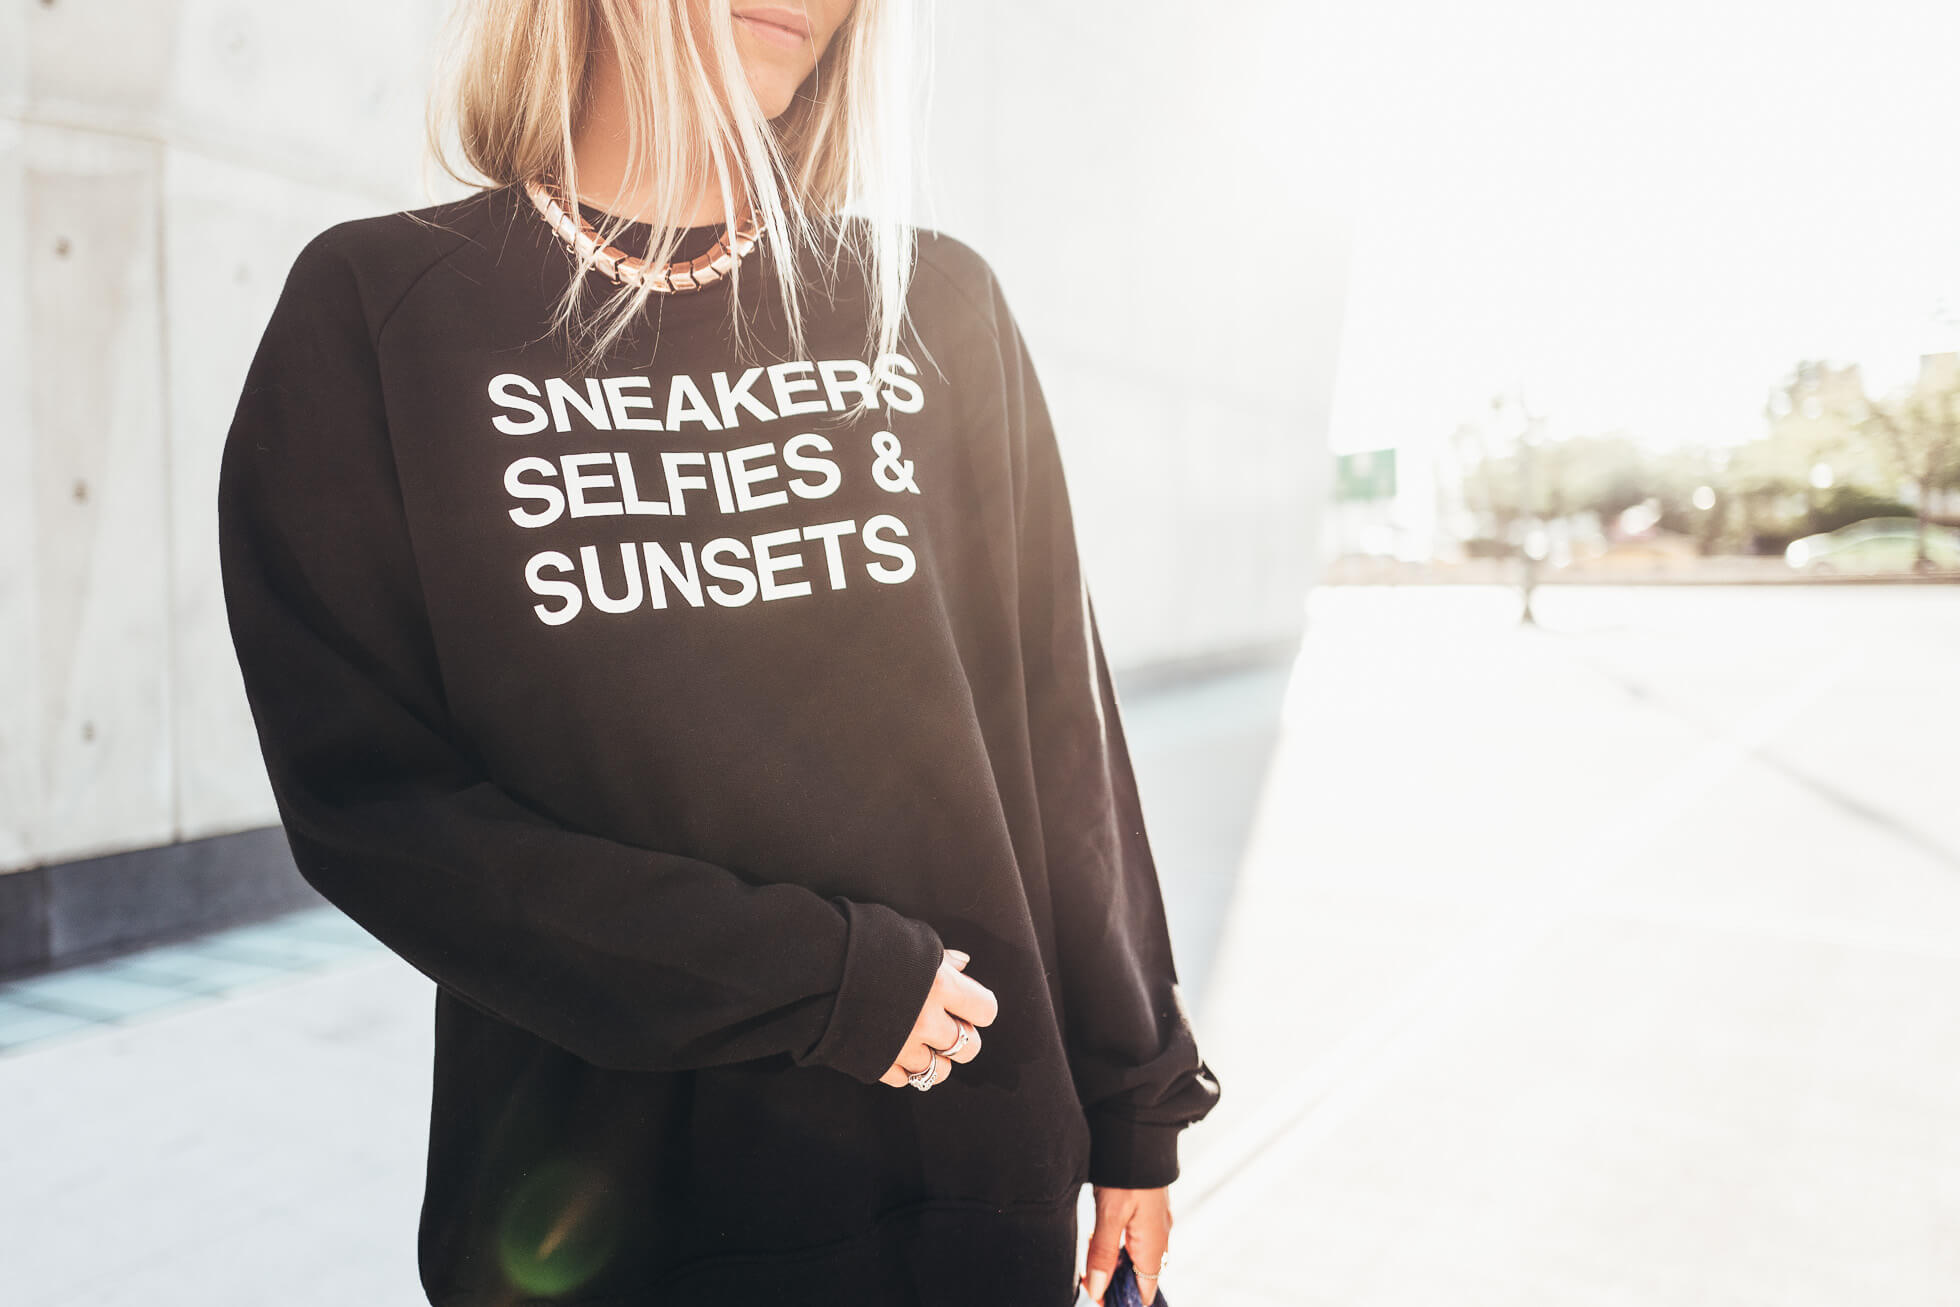 janni-deler-sneakers-selfies-sunsets-sweaterL1090938